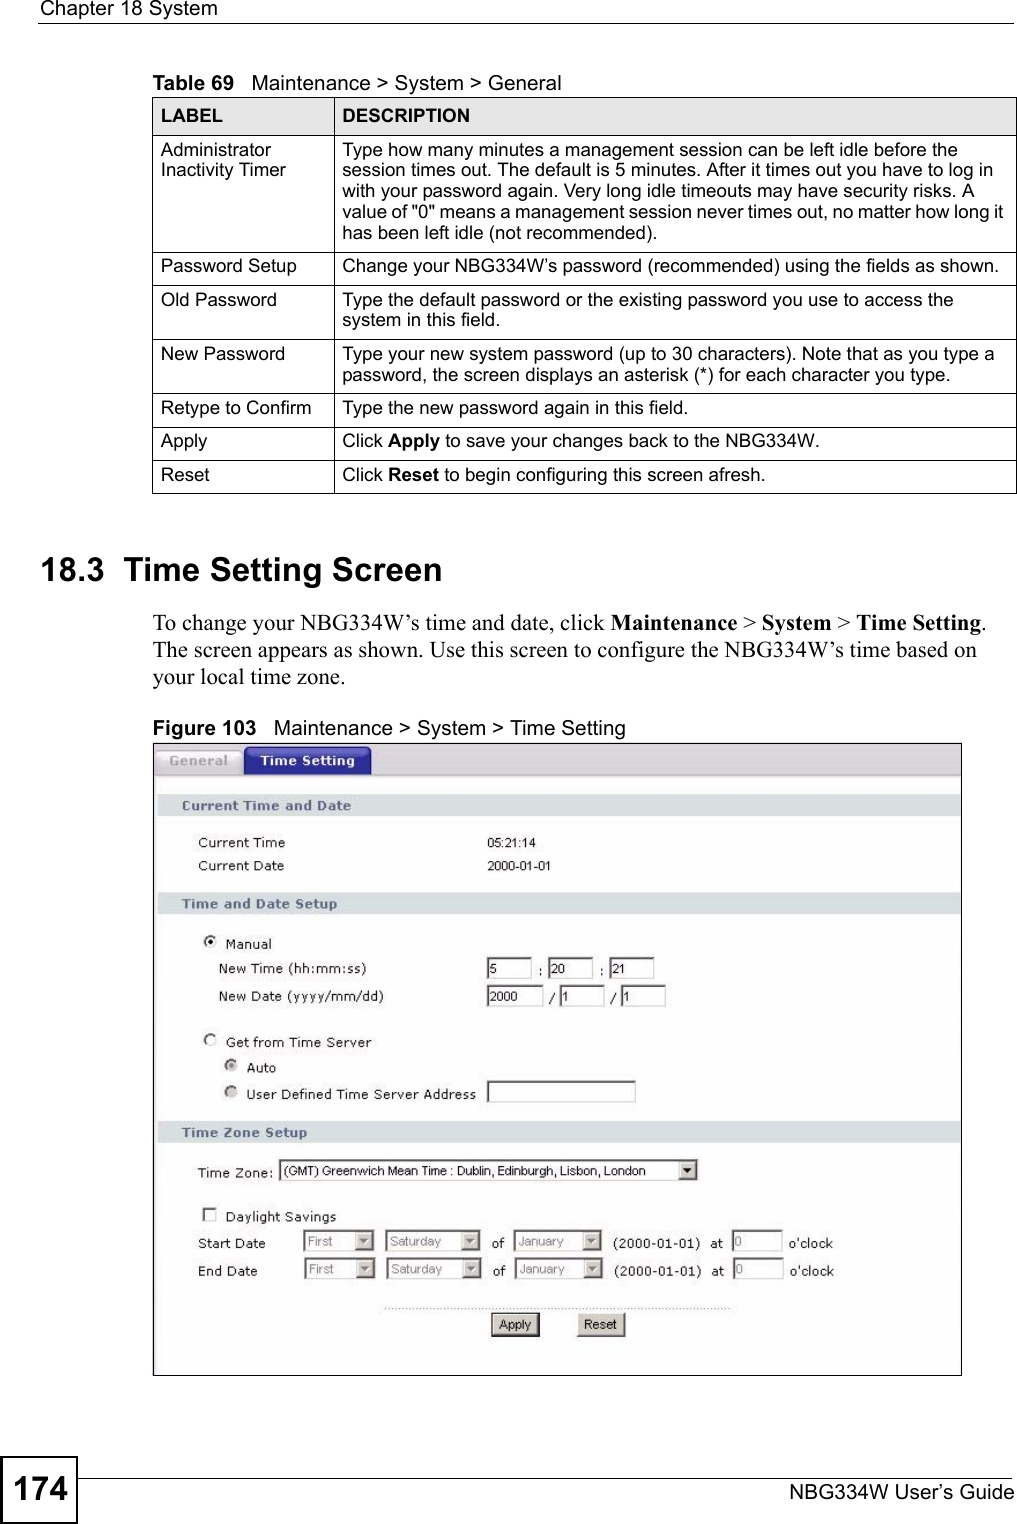 Chapter 18 SystemNBG334W User’s Guide17418.3  Time Setting ScreenTo change your NBG334W’s time and date, click Maintenance &gt; System &gt; Time Setting. The screen appears as shown. Use this screen to configure the NBG334W’s time based on your local time zone.Figure 103   Maintenance &gt; System &gt; Time Setting Administrator Inactivity TimerType how many minutes a management session can be left idle before the session times out. The default is 5 minutes. After it times out you have to log in with your password again. Very long idle timeouts may have security risks. A value of &quot;0&quot; means a management session never times out, no matter how long it has been left idle (not recommended).Password Setup Change your NBG334W’s password (recommended) using the fields as shown.Old Password Type the default password or the existing password you use to access the system in this field.New Password Type your new system password (up to 30 characters). Note that as you type a password, the screen displays an asterisk (*) for each character you type.Retype to Confirm Type the new password again in this field.Apply Click Apply to save your changes back to the NBG334W.Reset Click Reset to begin configuring this screen afresh.Table 69   Maintenance &gt; System &gt; GeneralLABEL DESCRIPTION